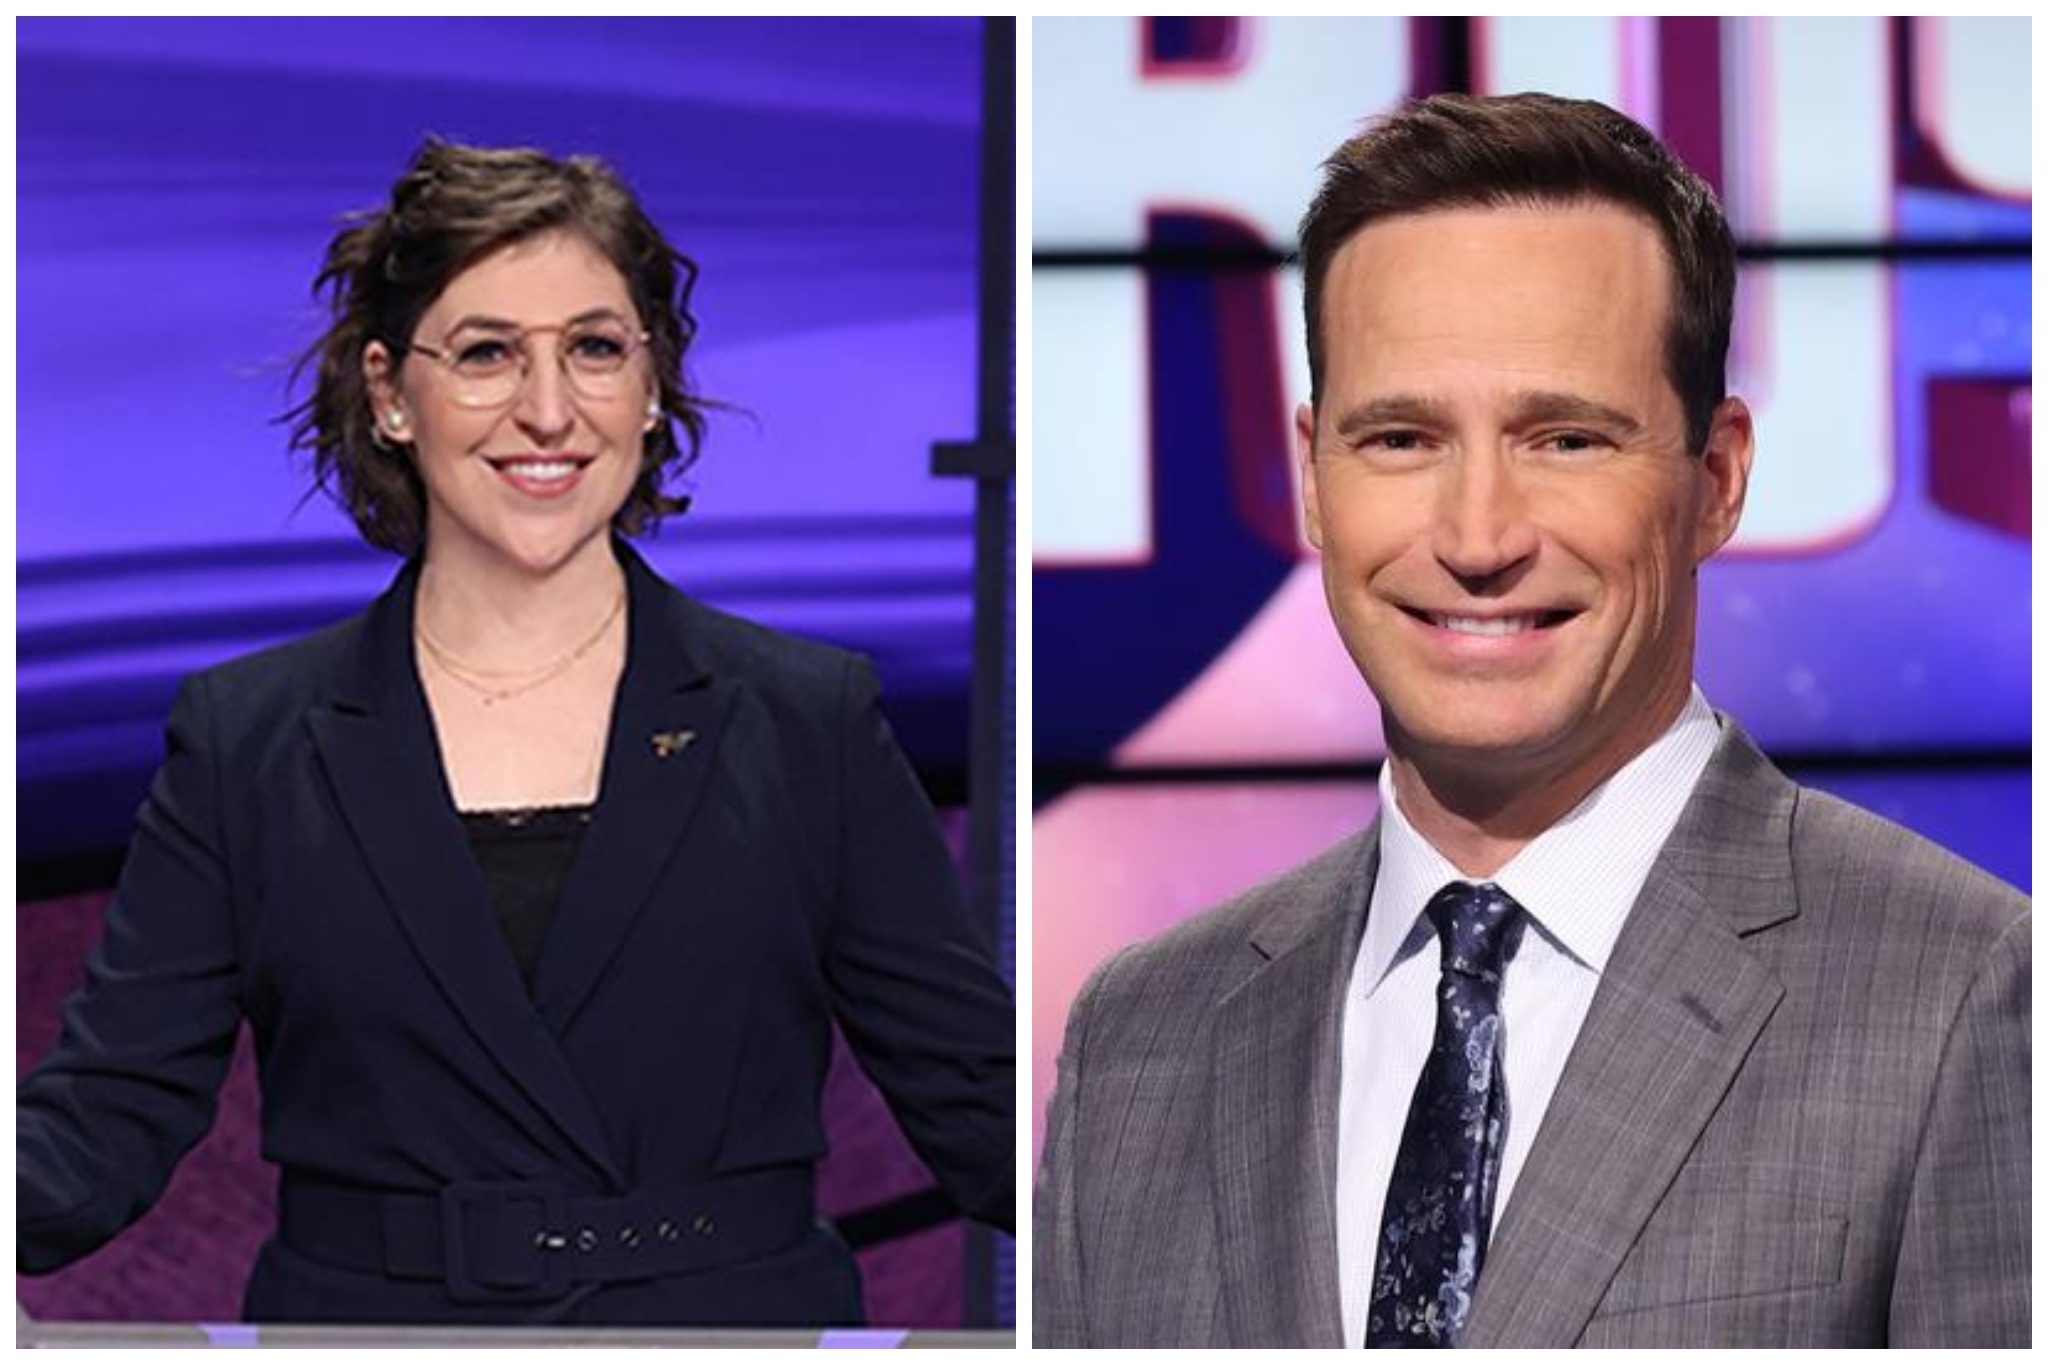 New 'Jeopardy!' Hosts Are Mike Richards and Mayim Bialik - WSJ